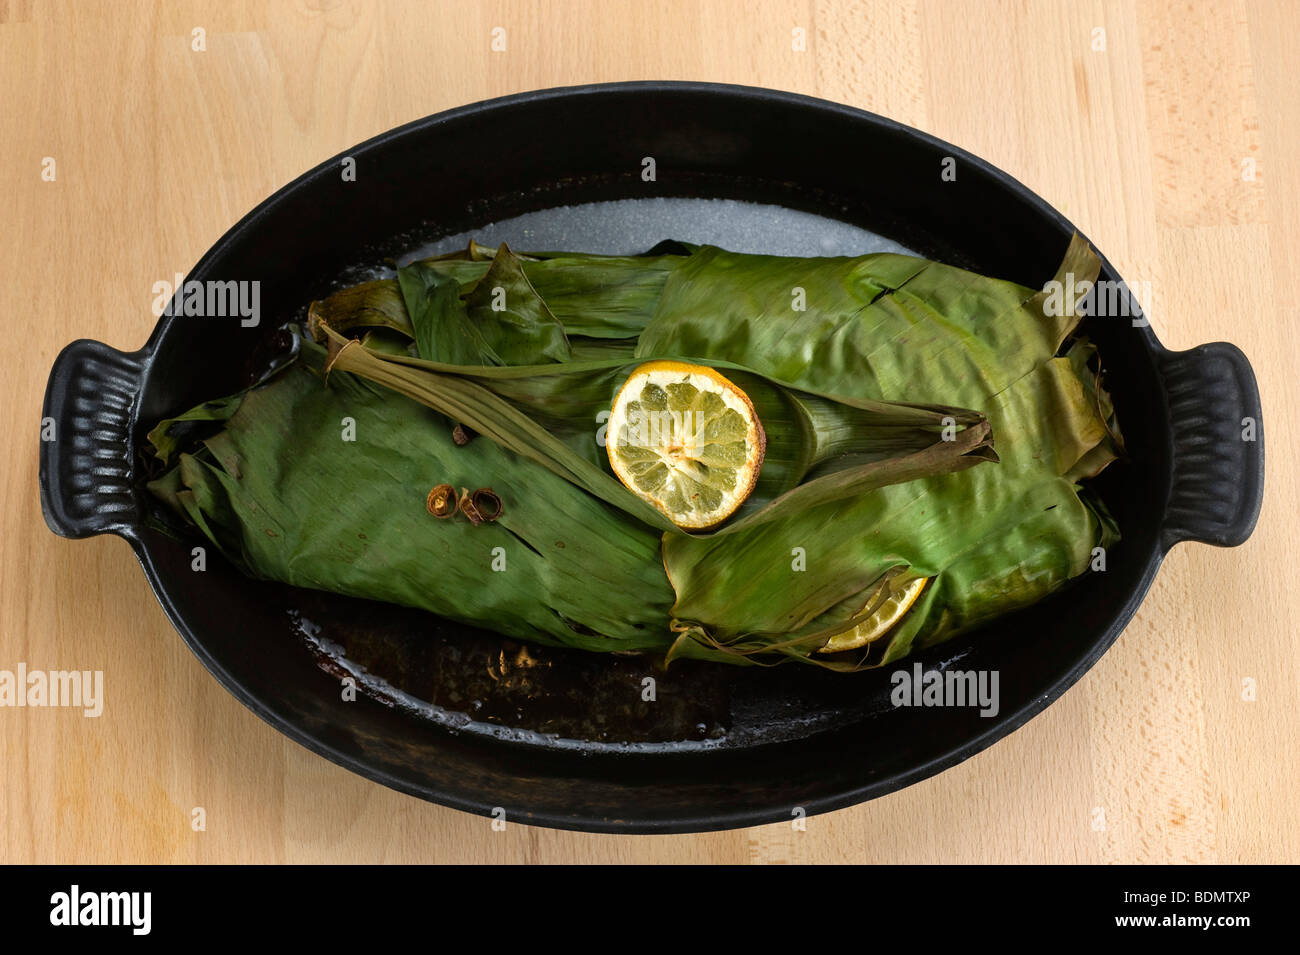 Fish cooked in banana leaves Stock Photo